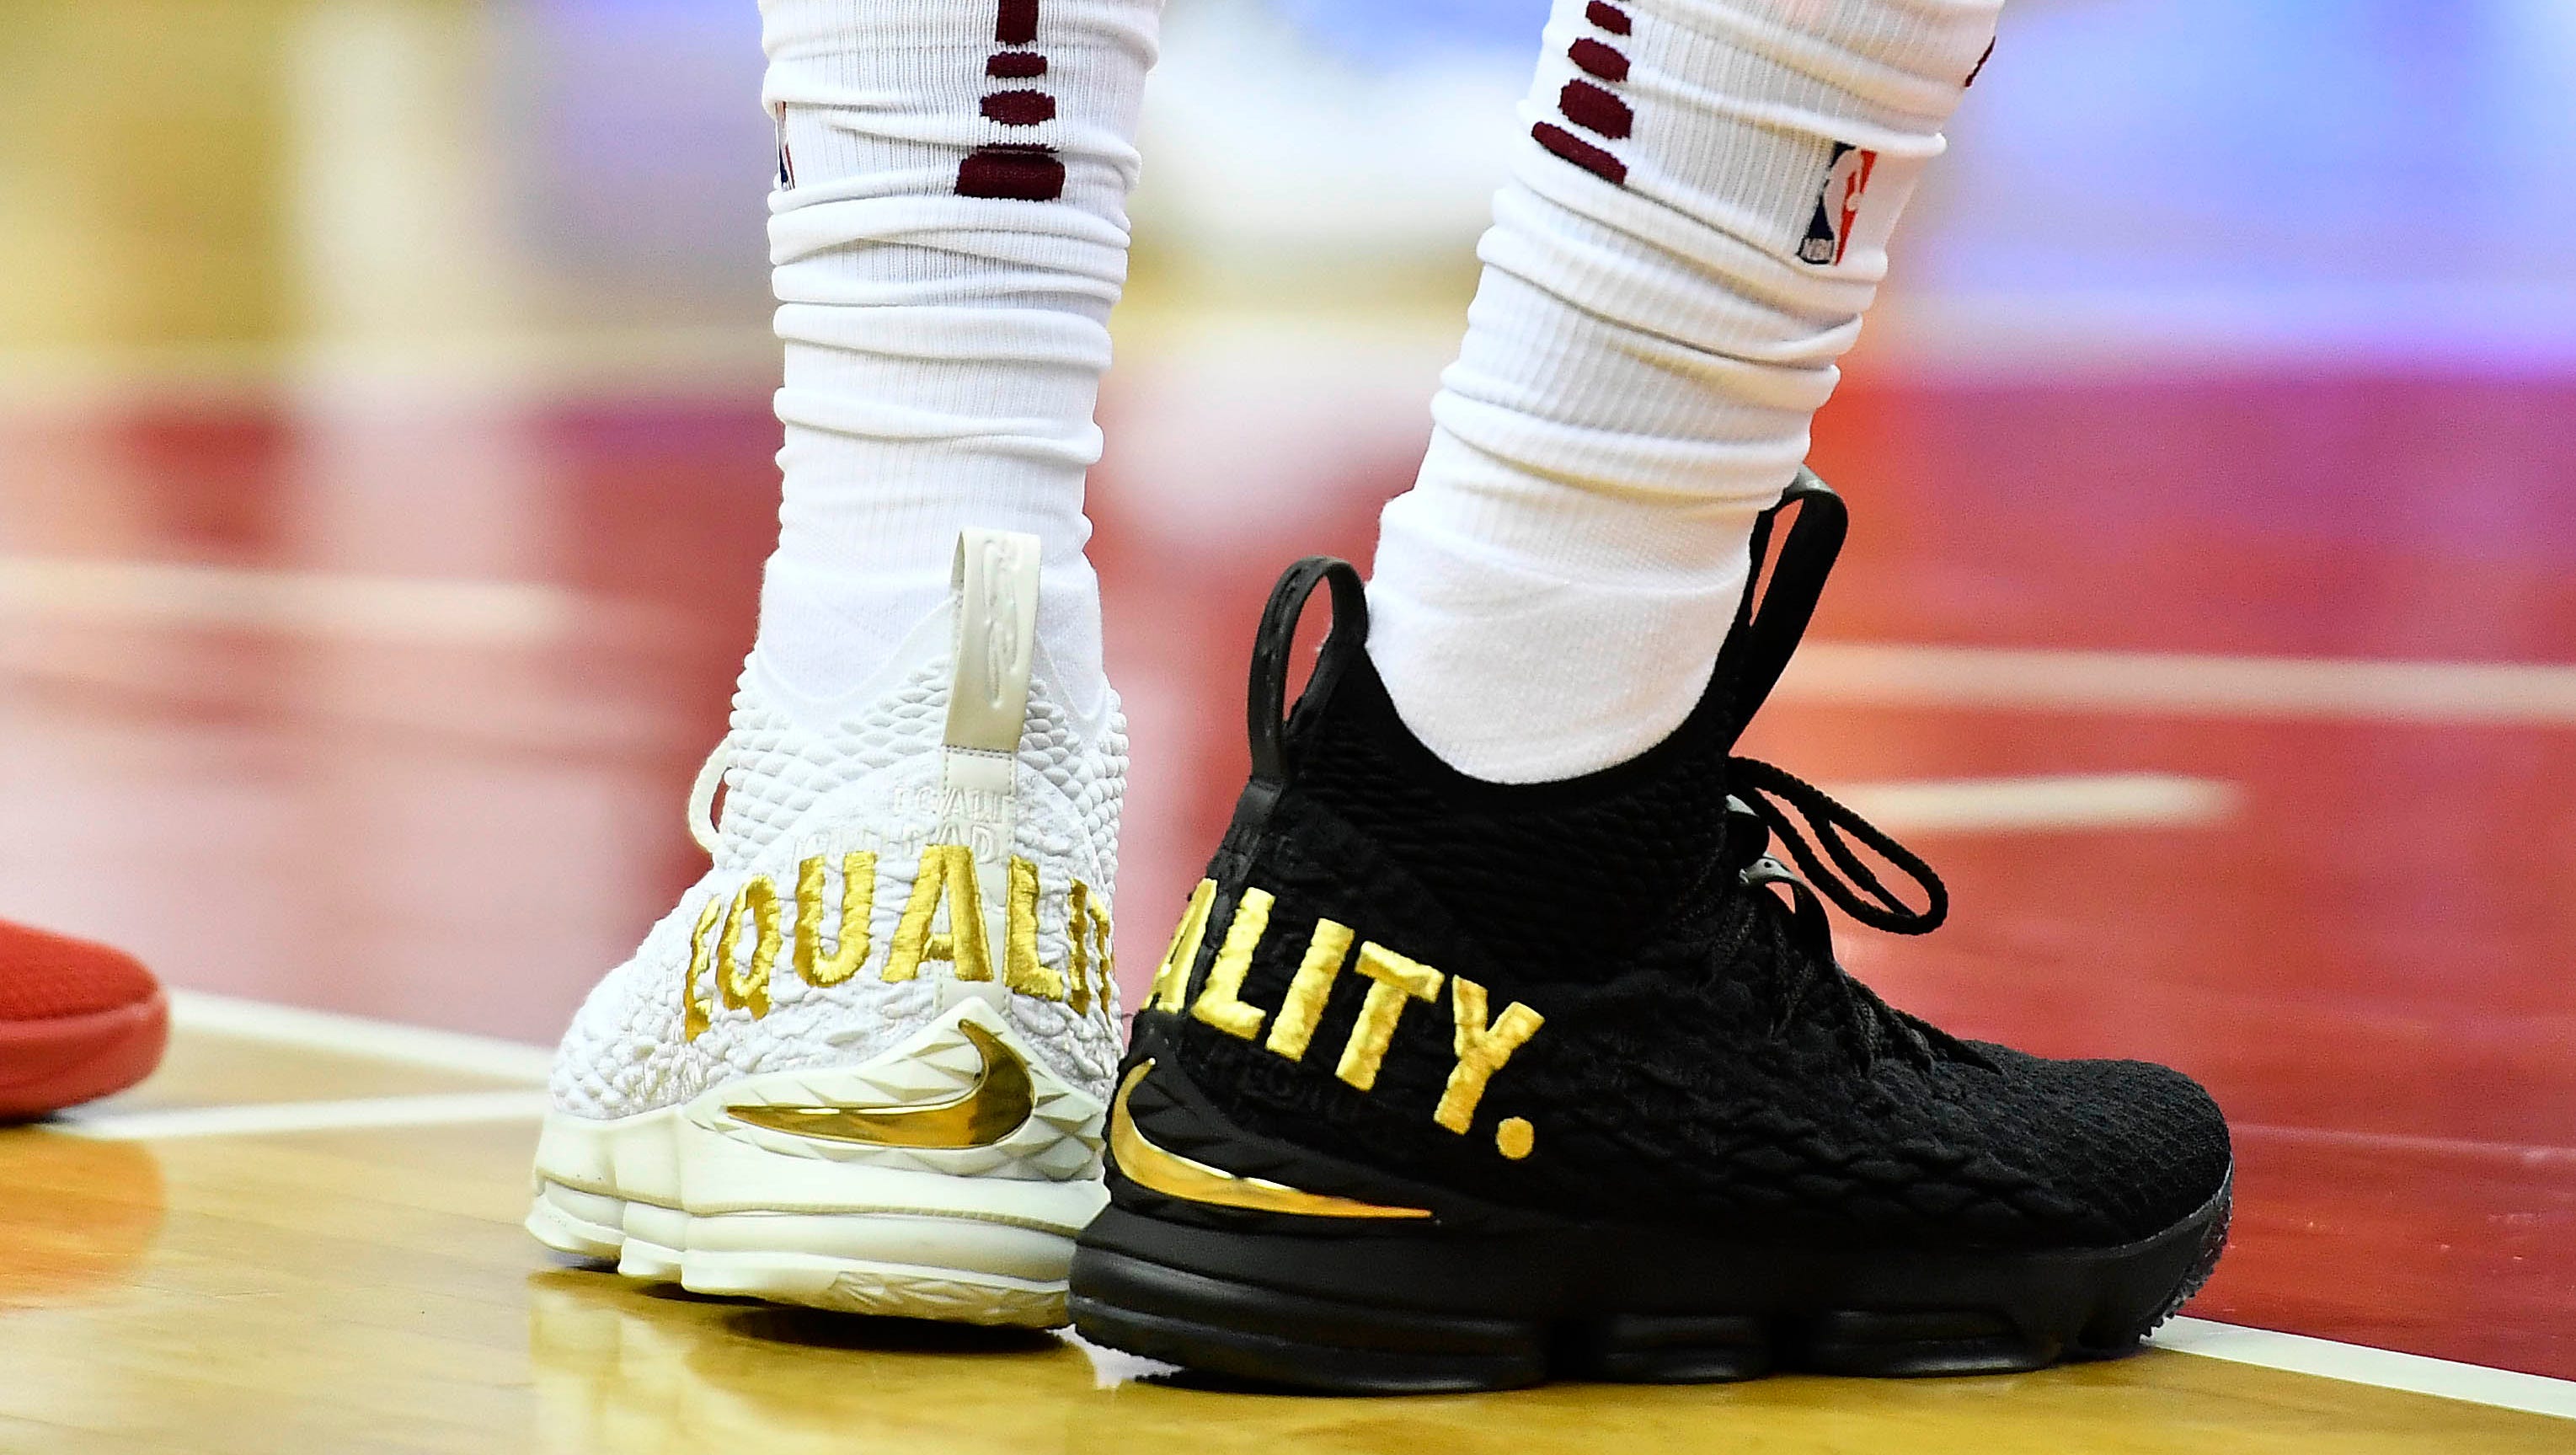 LeBron James makes statement with 'Equality' sneakers worn in .